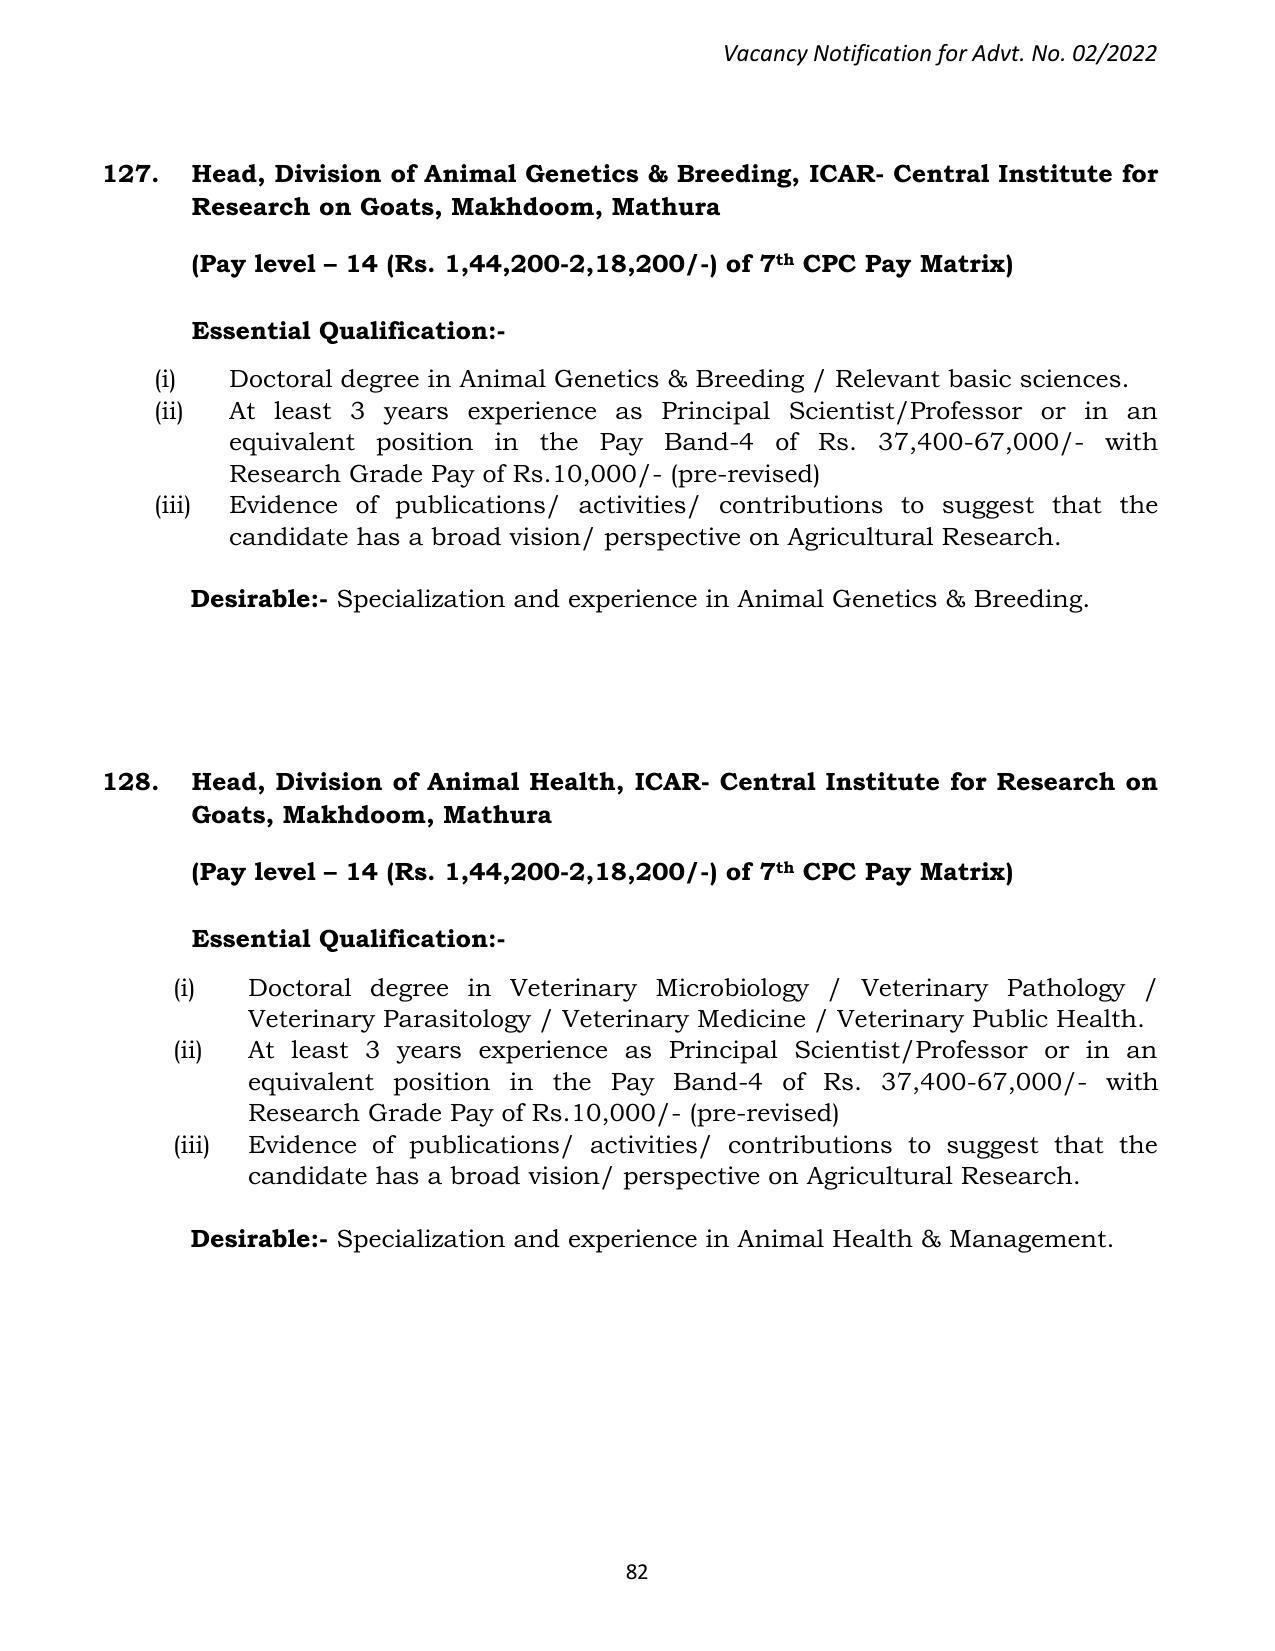 ASRB Non-Research Management Recruitment 2022 - Page 66